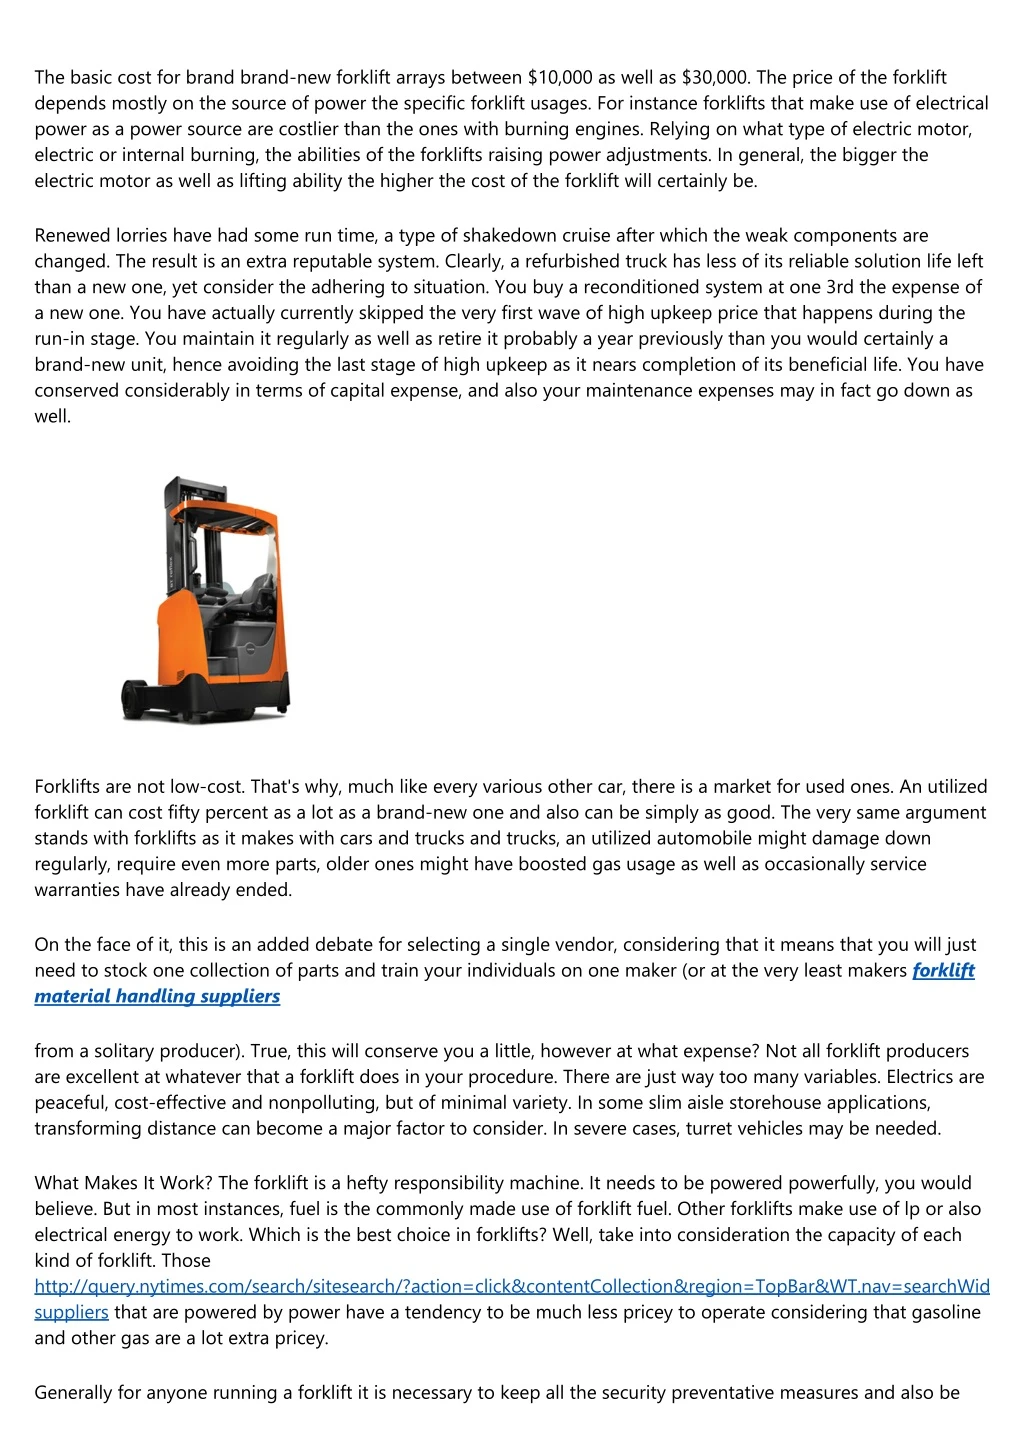 the basic cost for brand brand new forklift